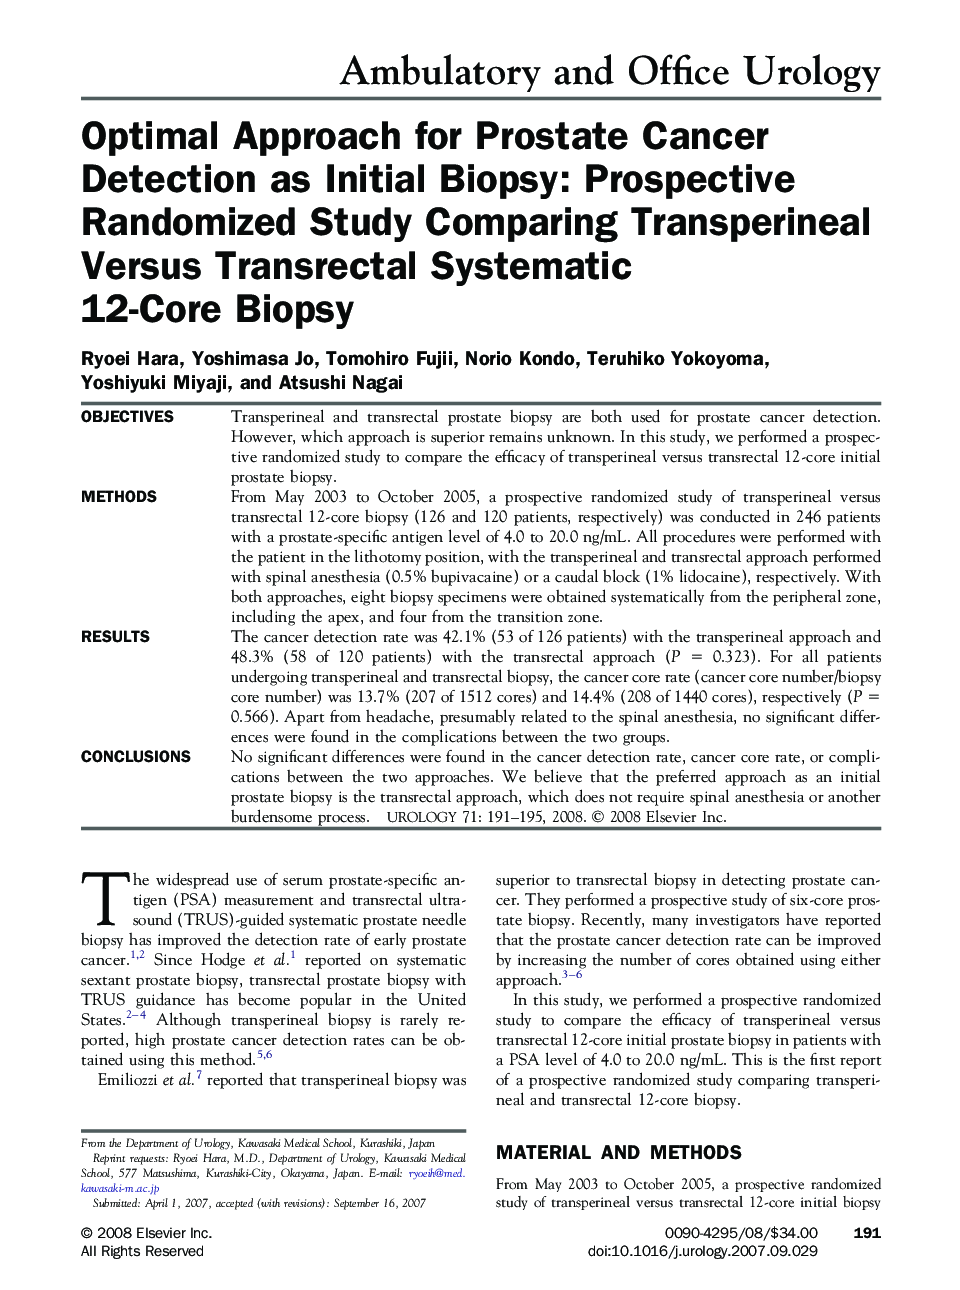 Optimal Approach for Prostate Cancer Detection as Initial Biopsy: Prospective Randomized Study Comparing Transperineal Versus Transrectal Systematic 12-Core Biopsy